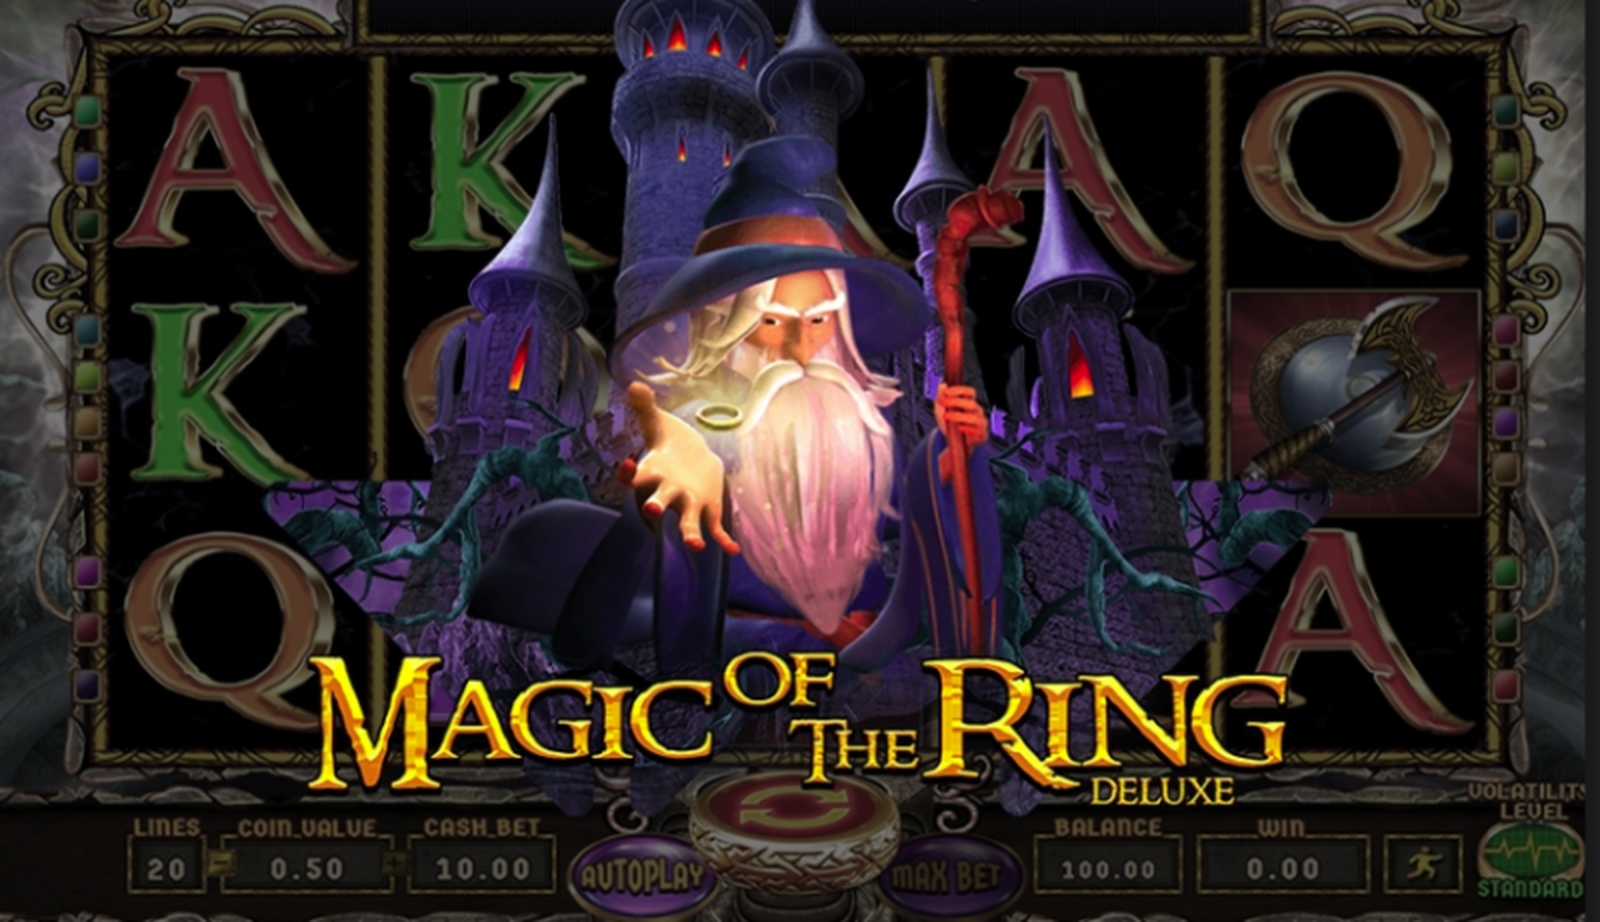 Magic of the Ring Deluxe demo